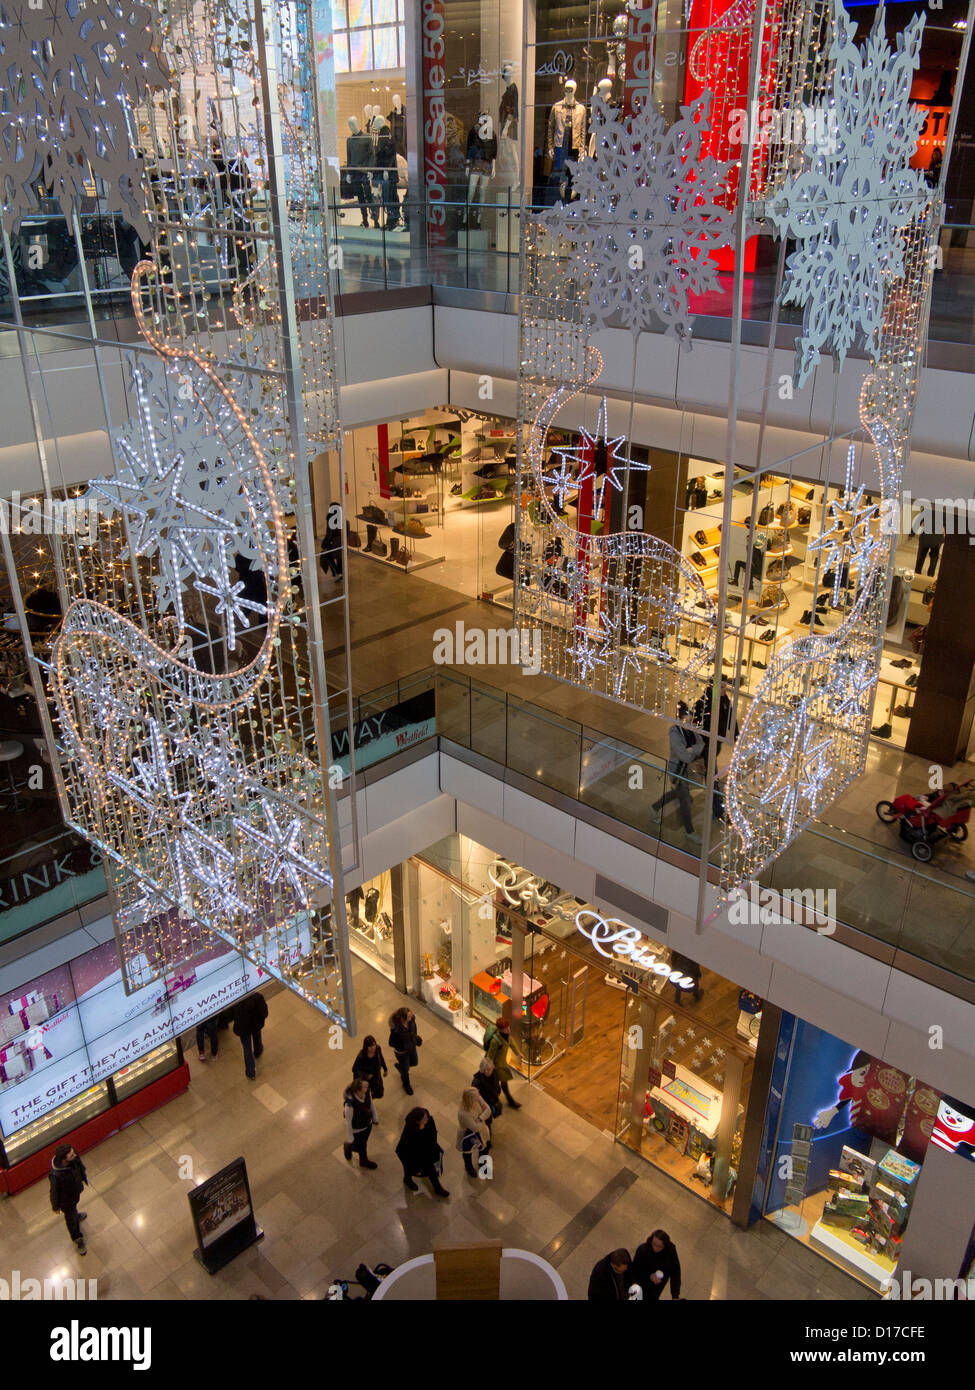 A festive display for Westfield London